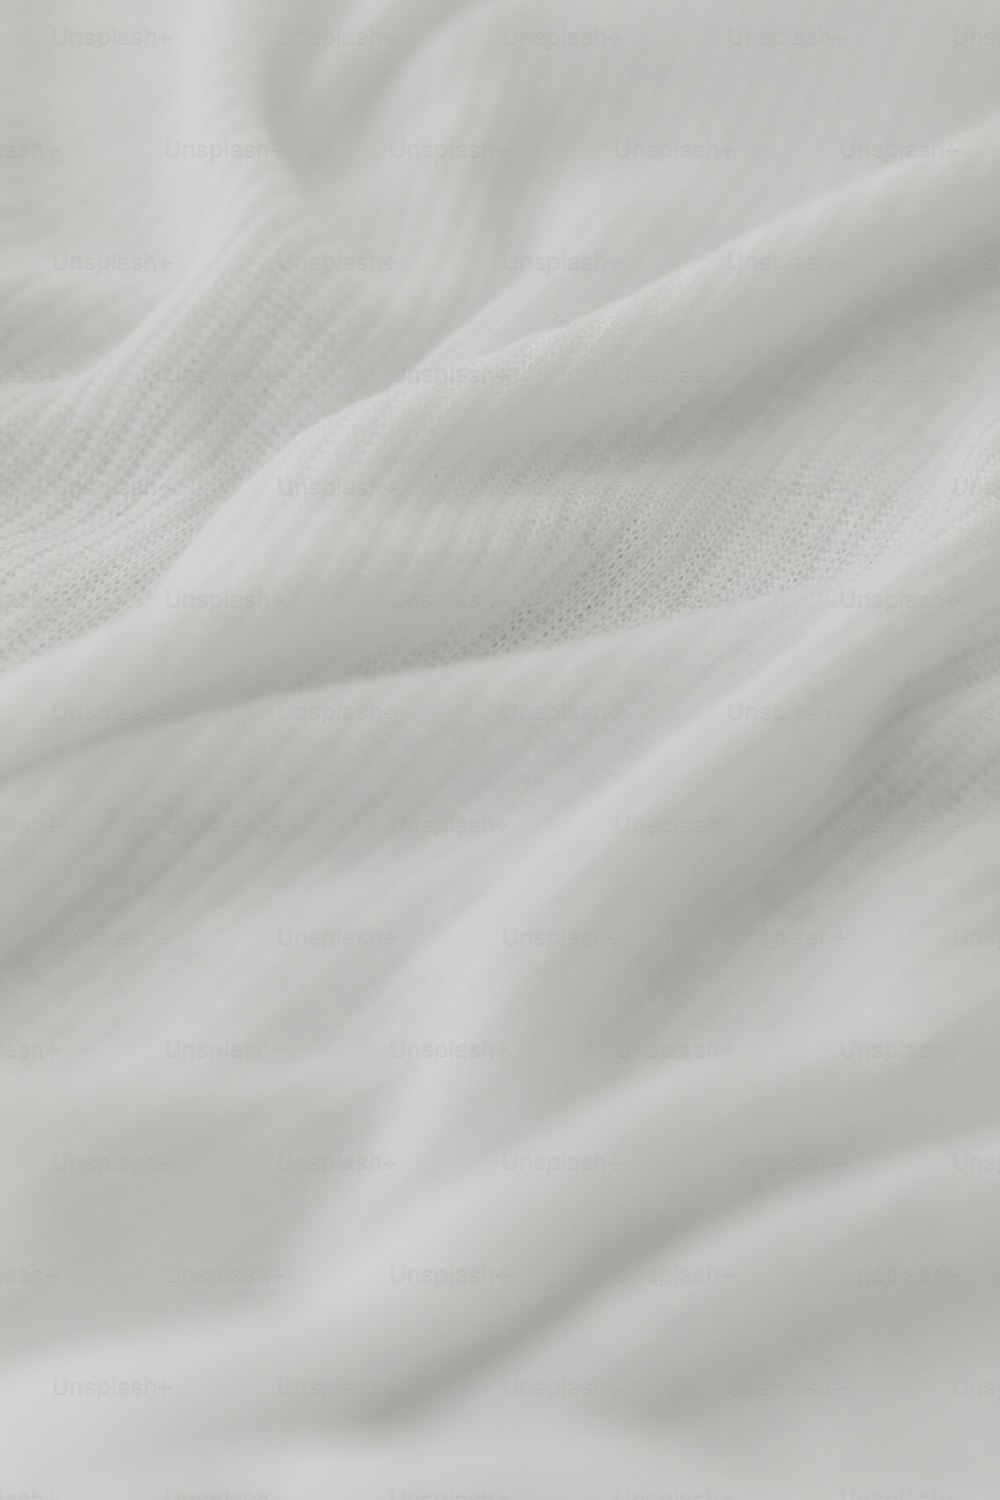 a close up view of a white bed sheet